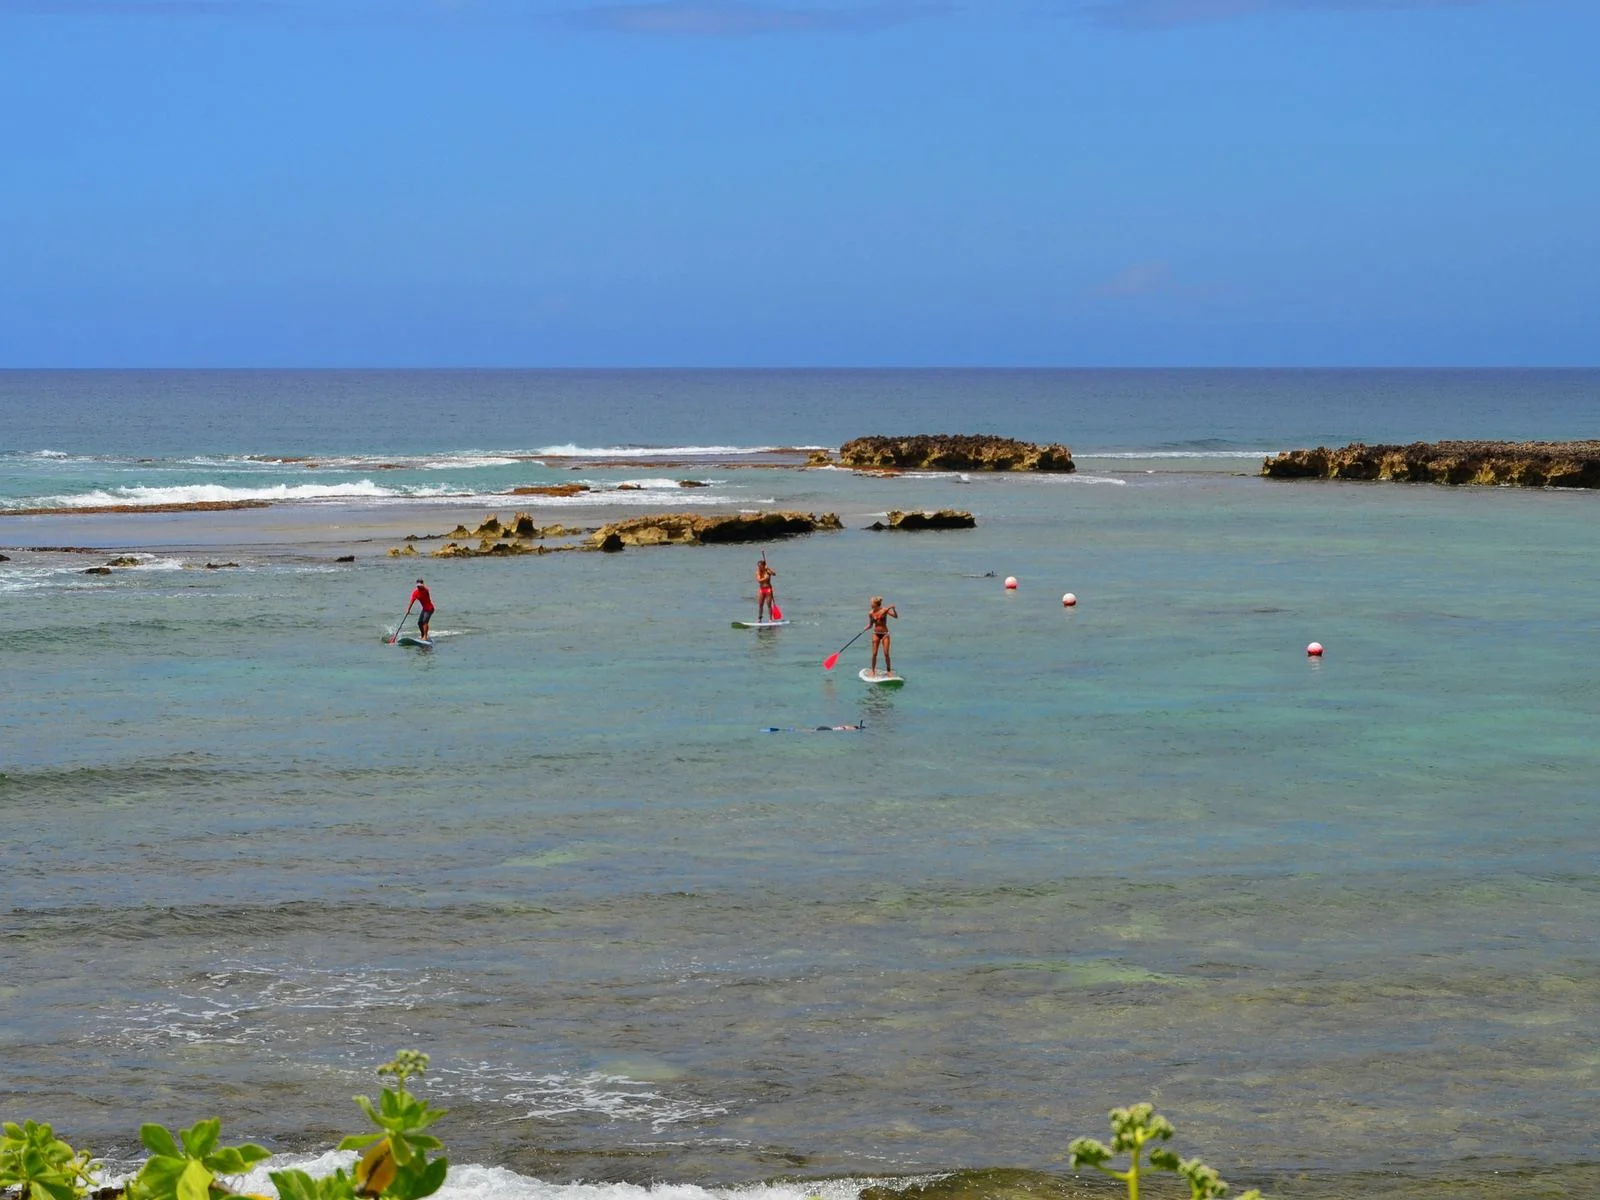 Three people paddle boarding and two snorkeling at the rocky Kuilima Cove, one of the best snorkeling spots in Hawaii